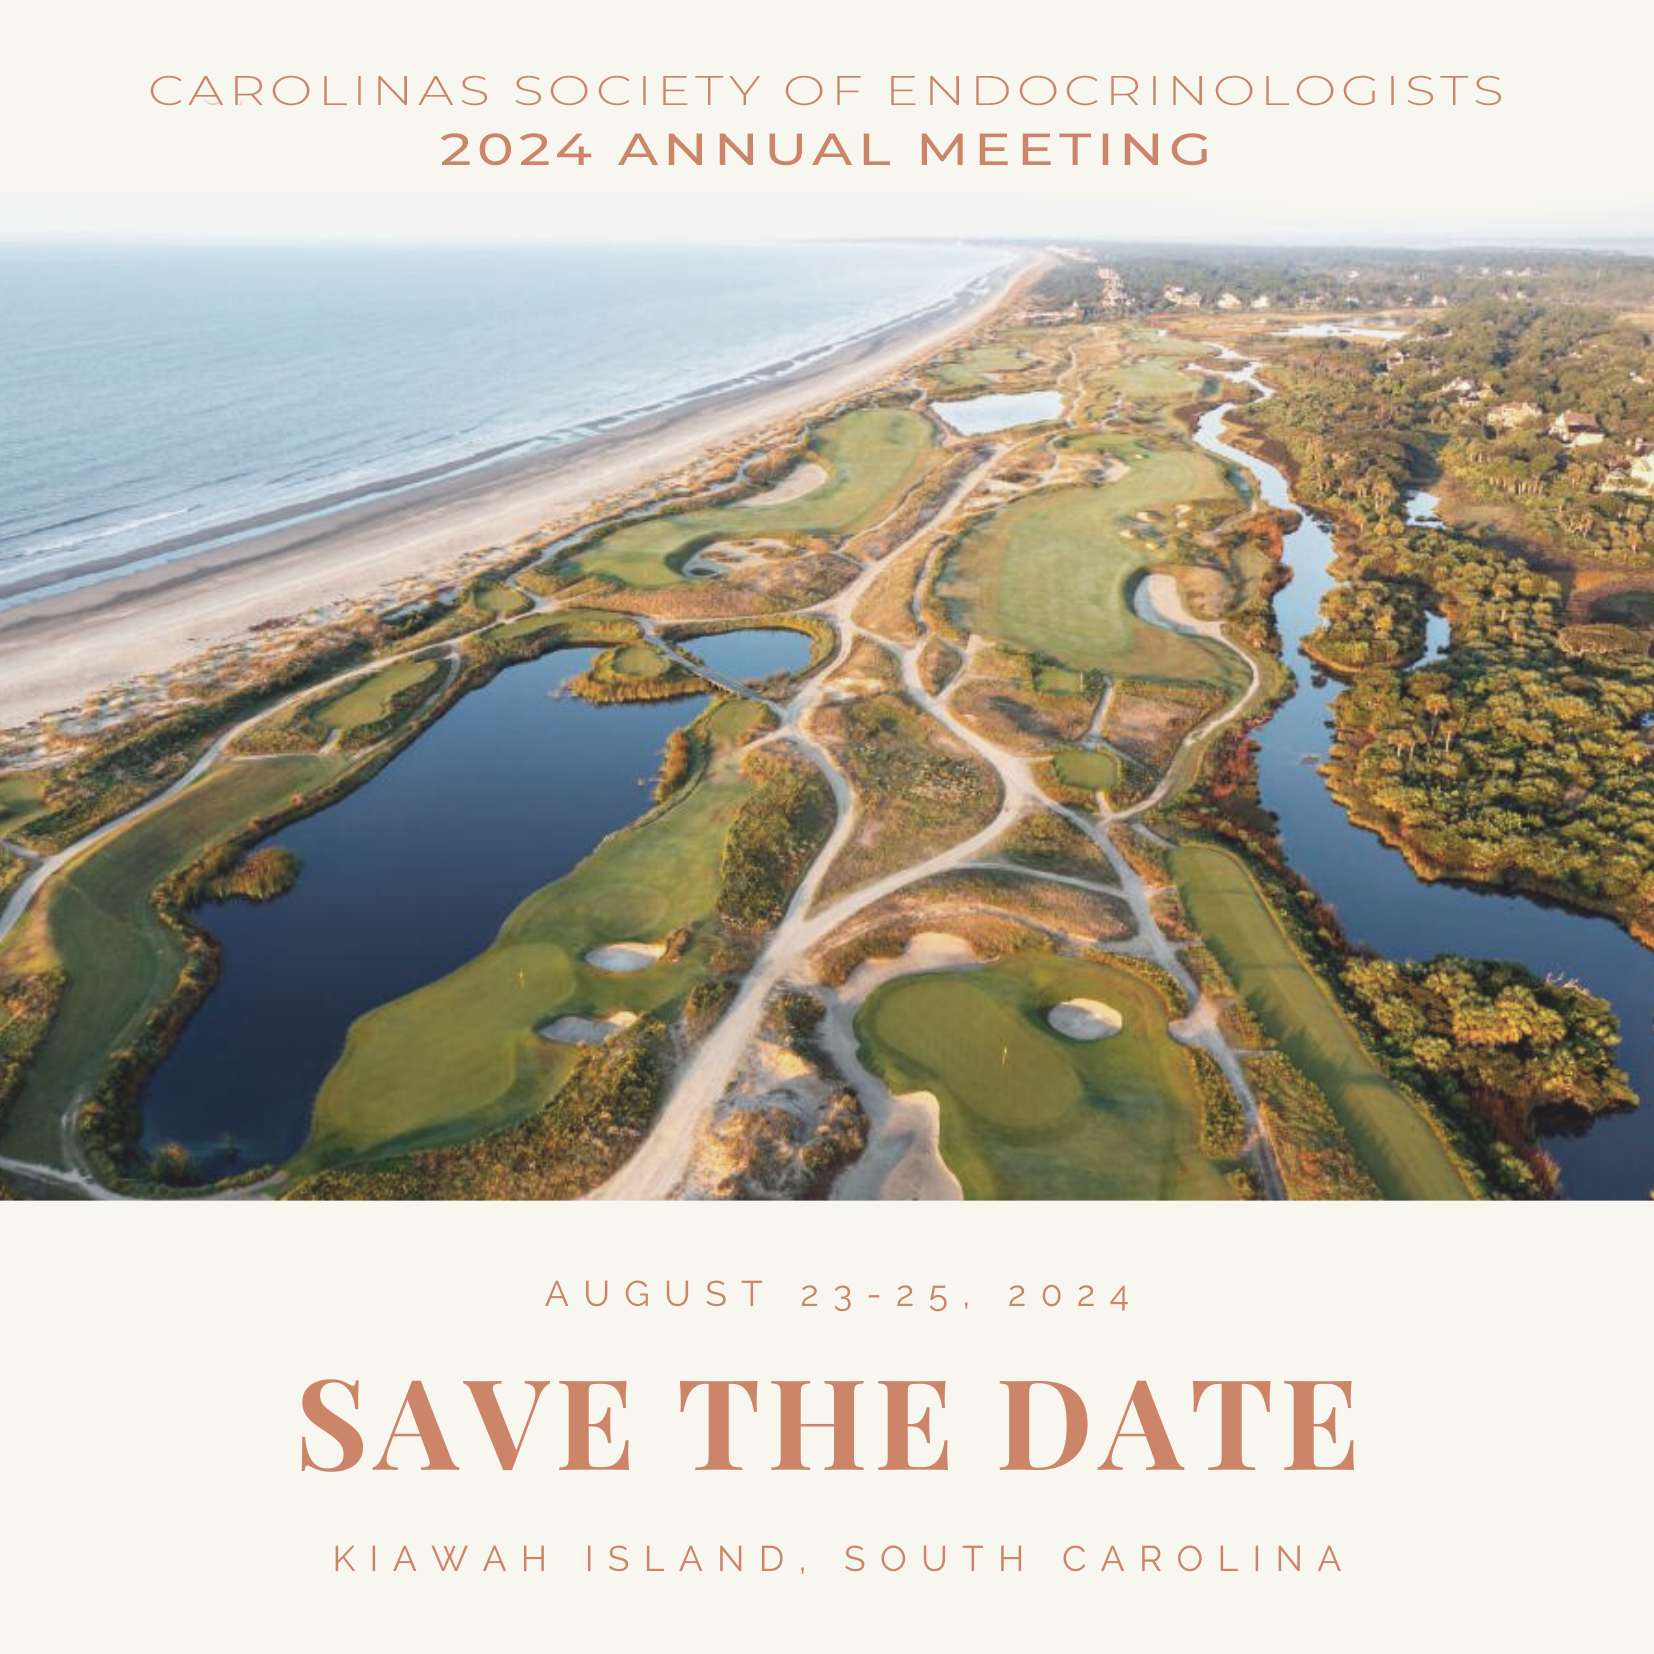 Save the date for the 2024 CSE Annual Meeting, Aug. 23-25, Kiawah